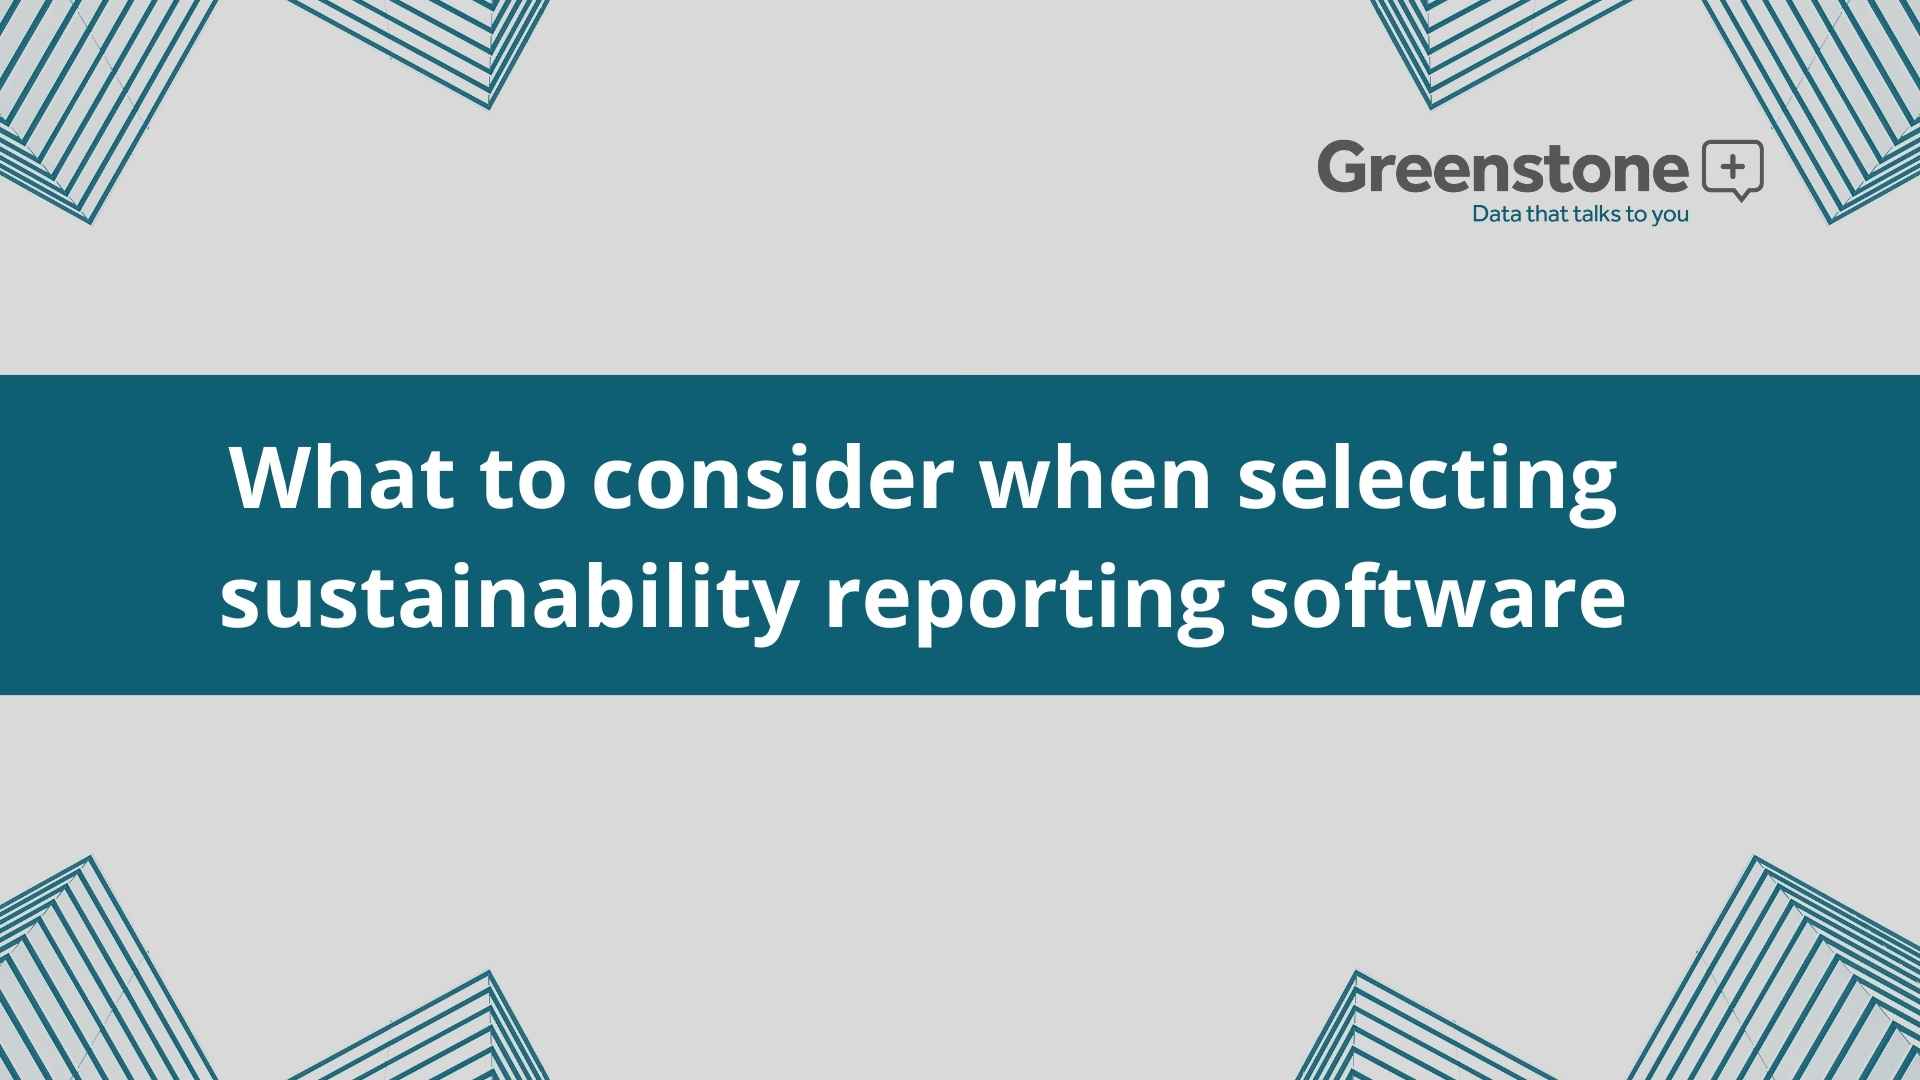 What to consider when selecting sustainability reporting software